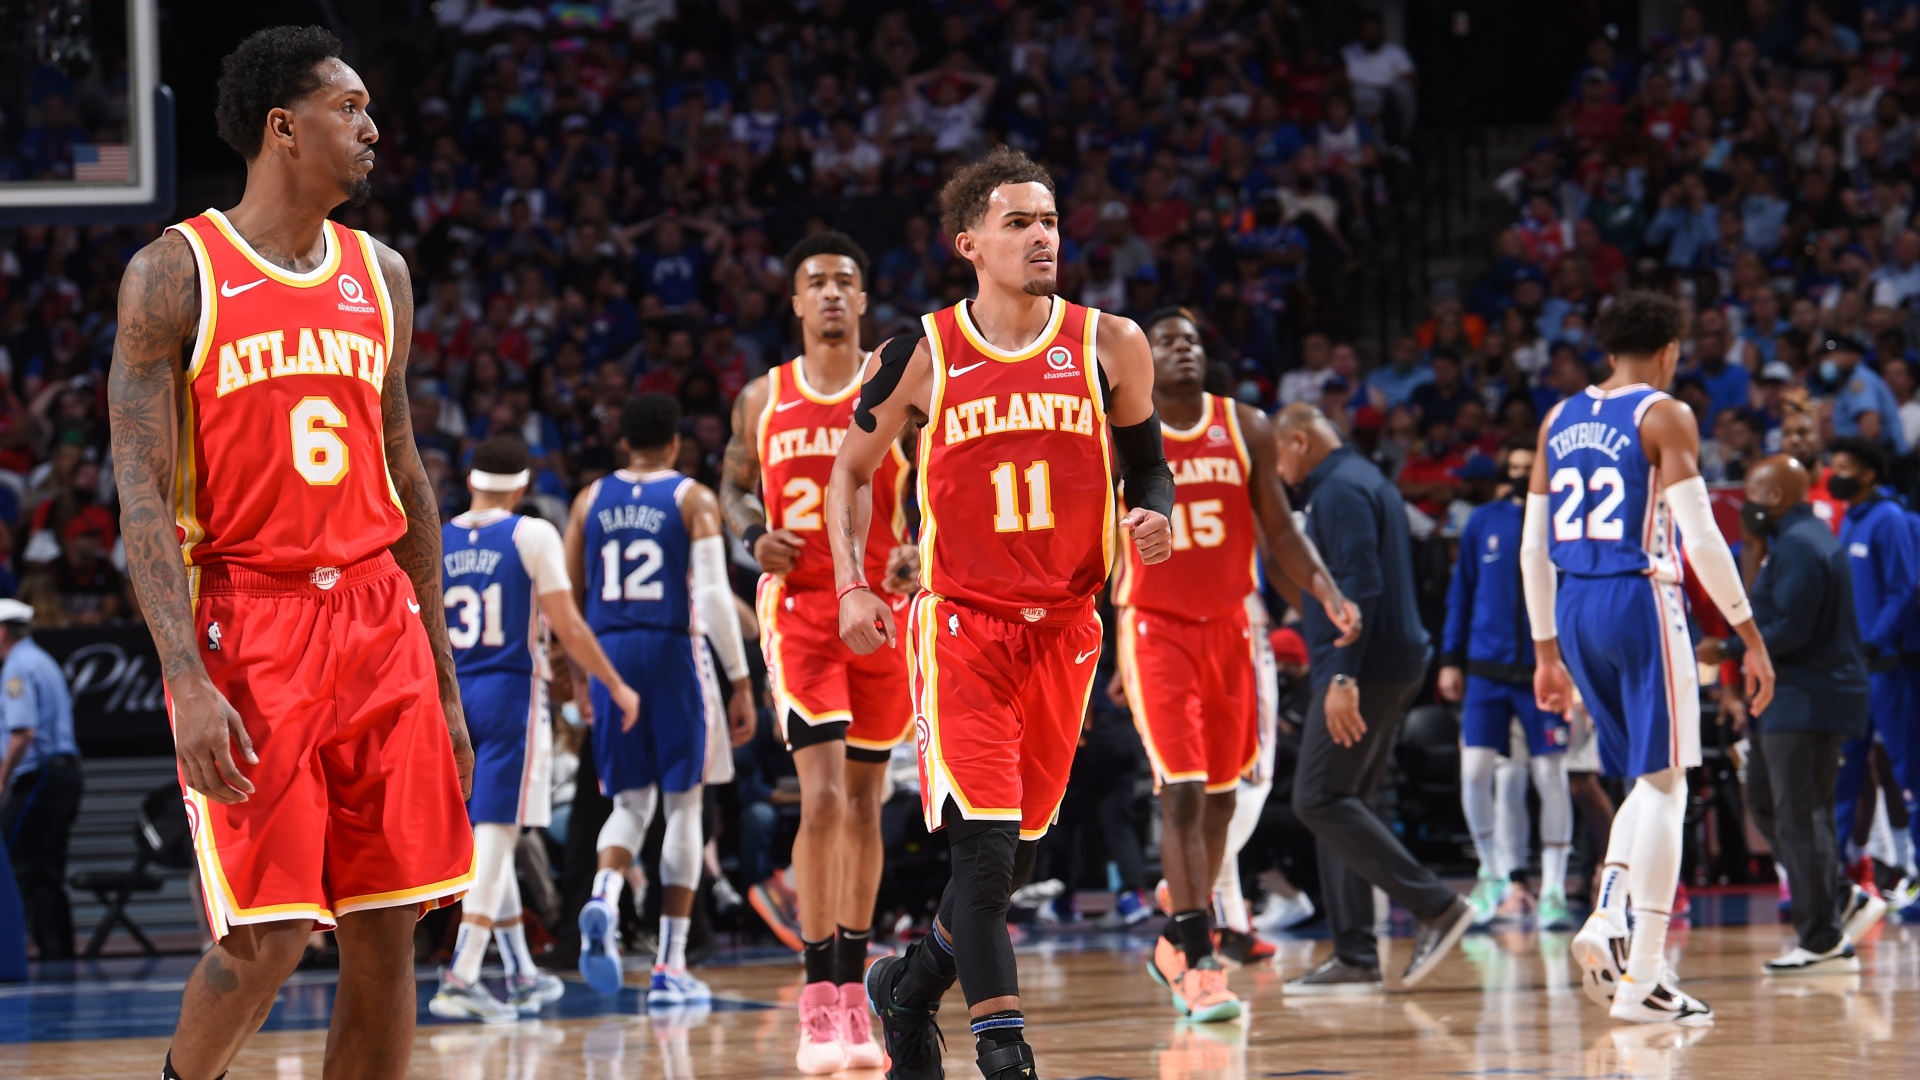 The location of the Atlanta Hawks vs. Philadelphia 76ers Among the Greatest Comebacks in NBA Playoffs History | NBA.com Argentina | The Official Site of the NBA